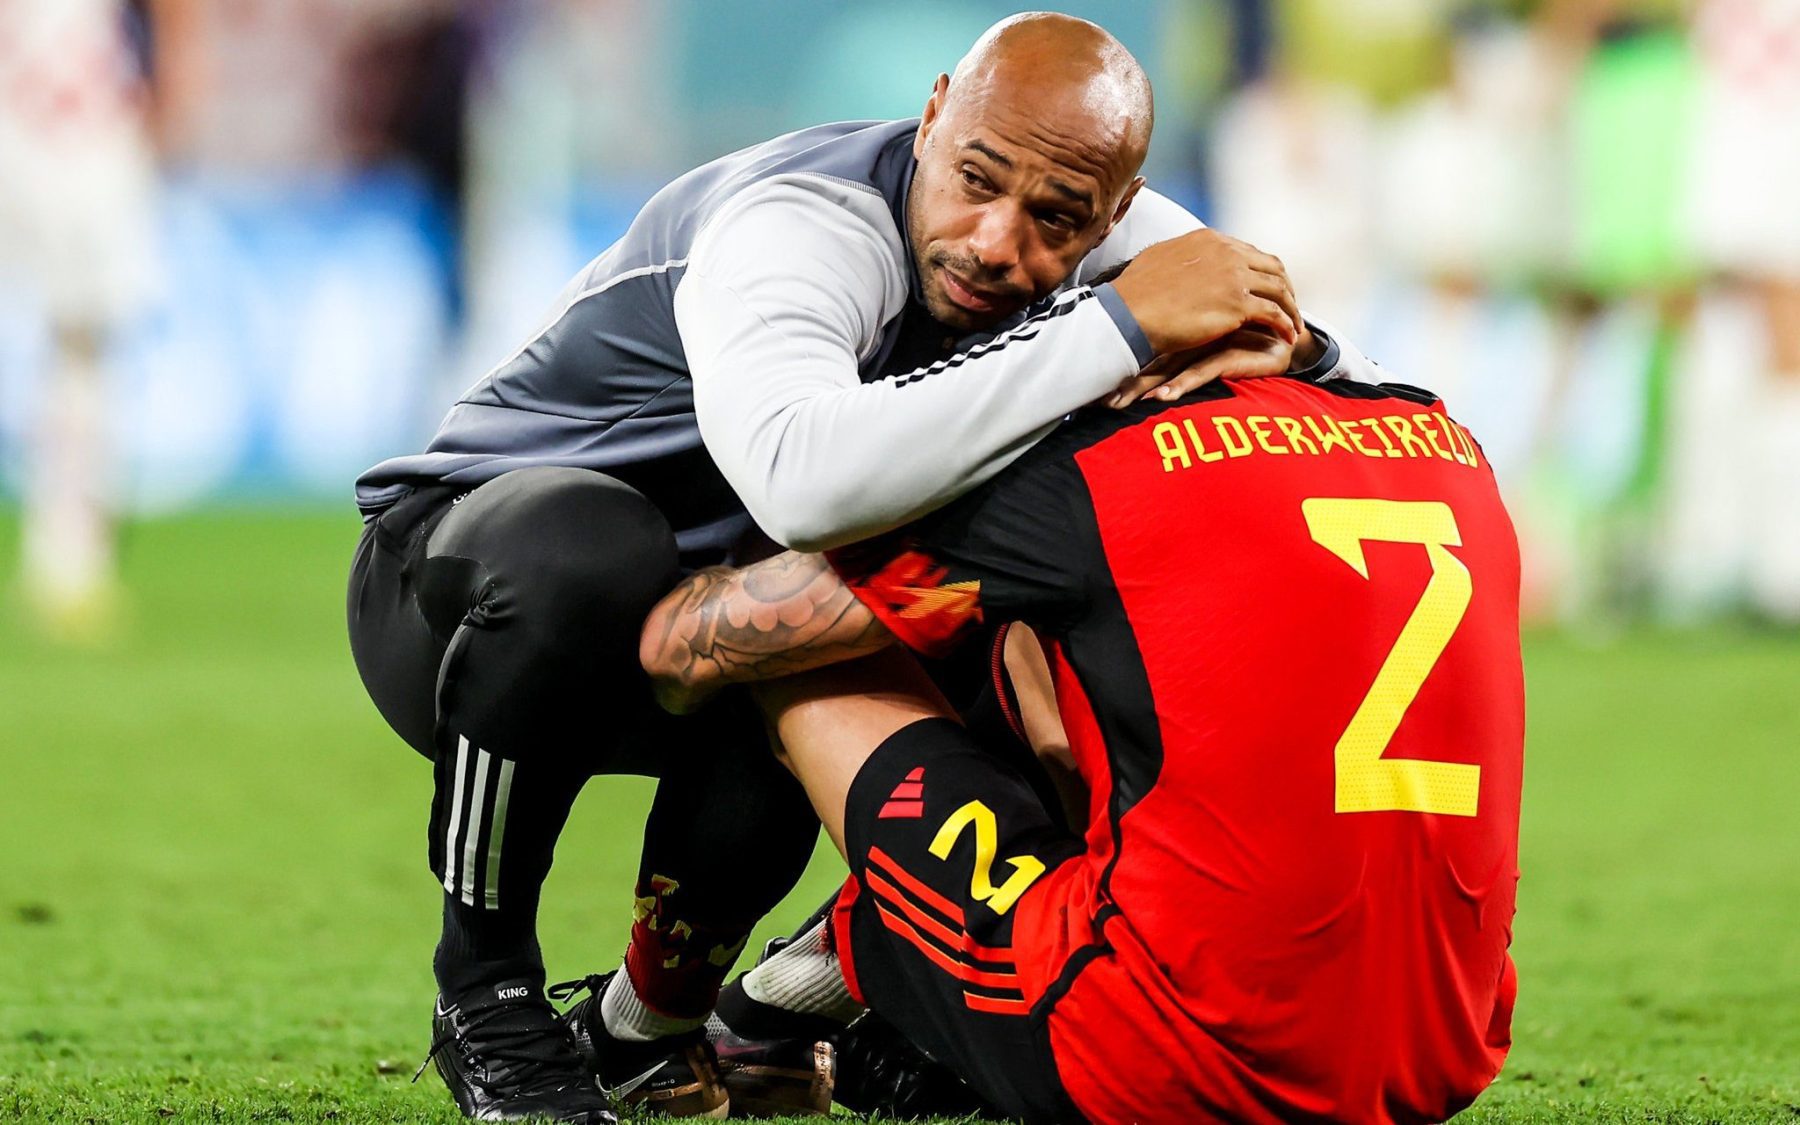 Thierry Henry consoling Alderweireld